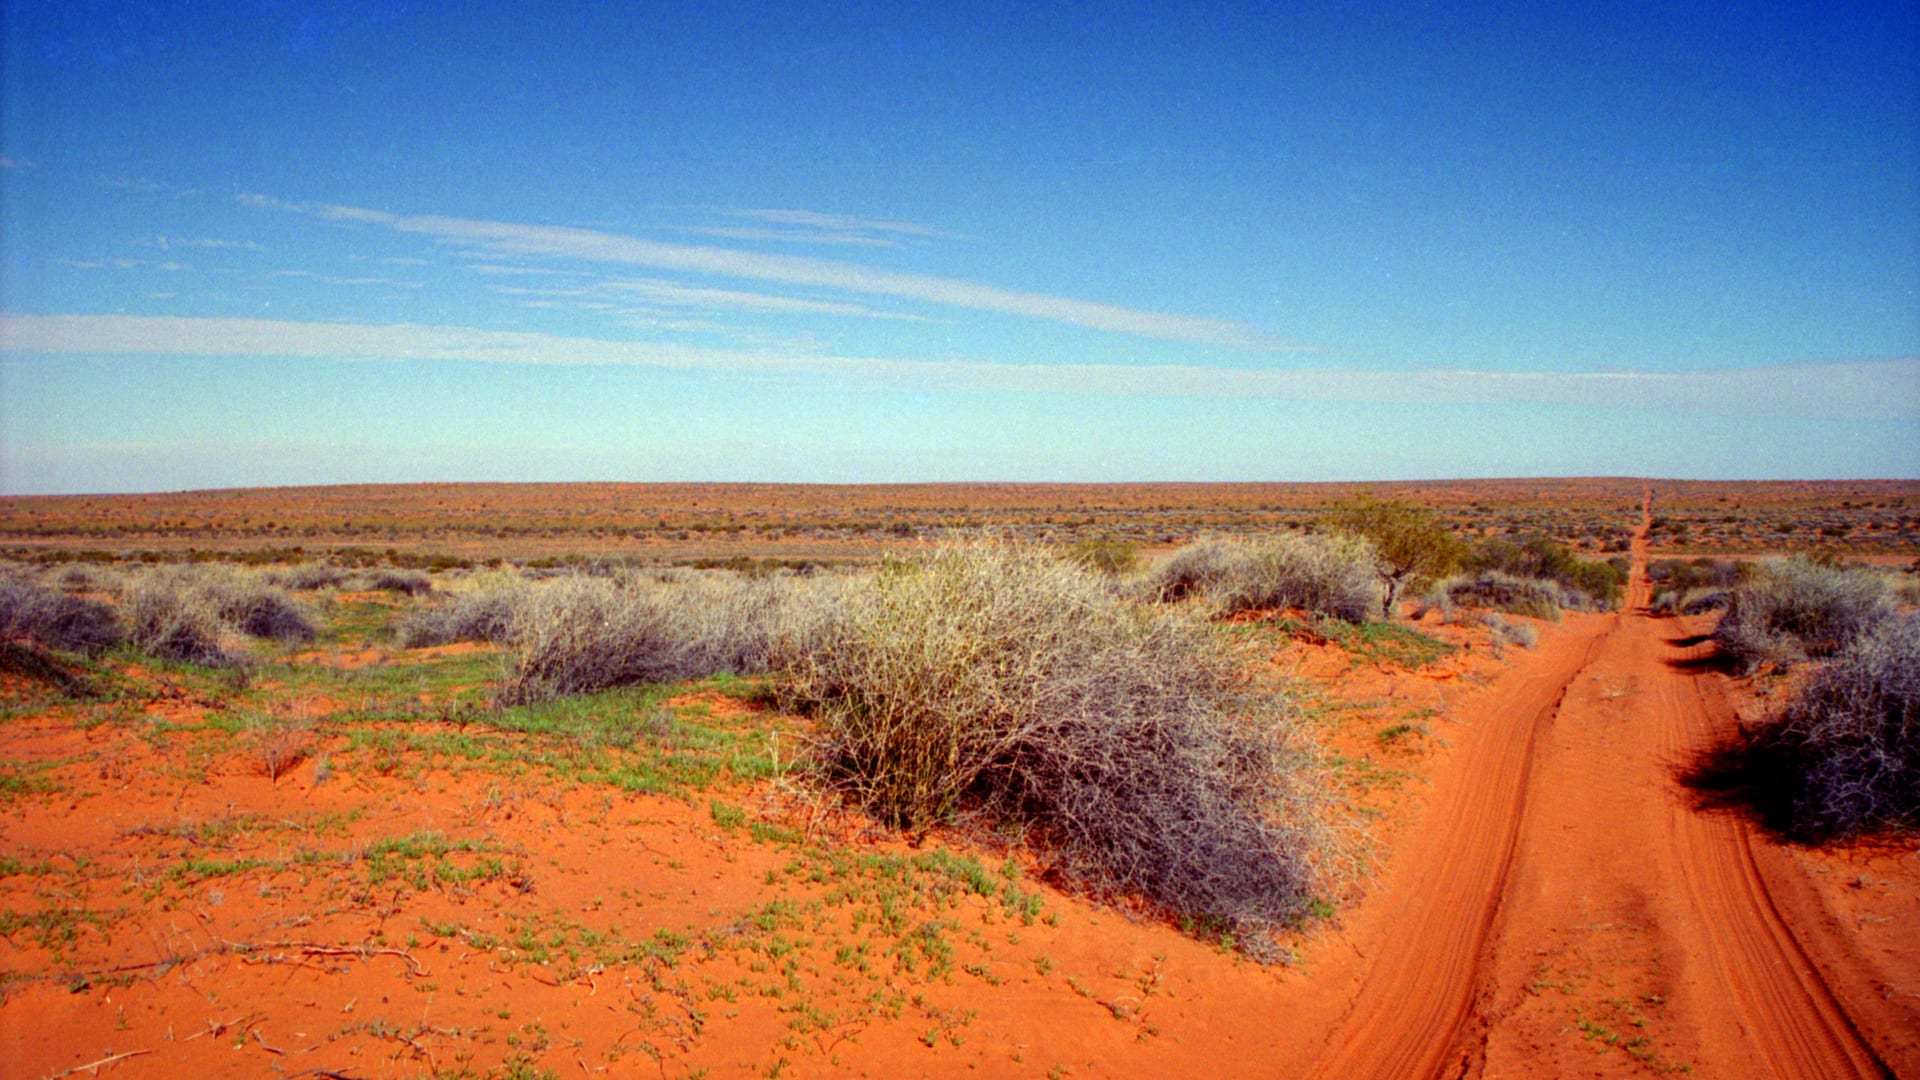 Visit Australia for: Simpson Desert Brush and road stretching into the distance